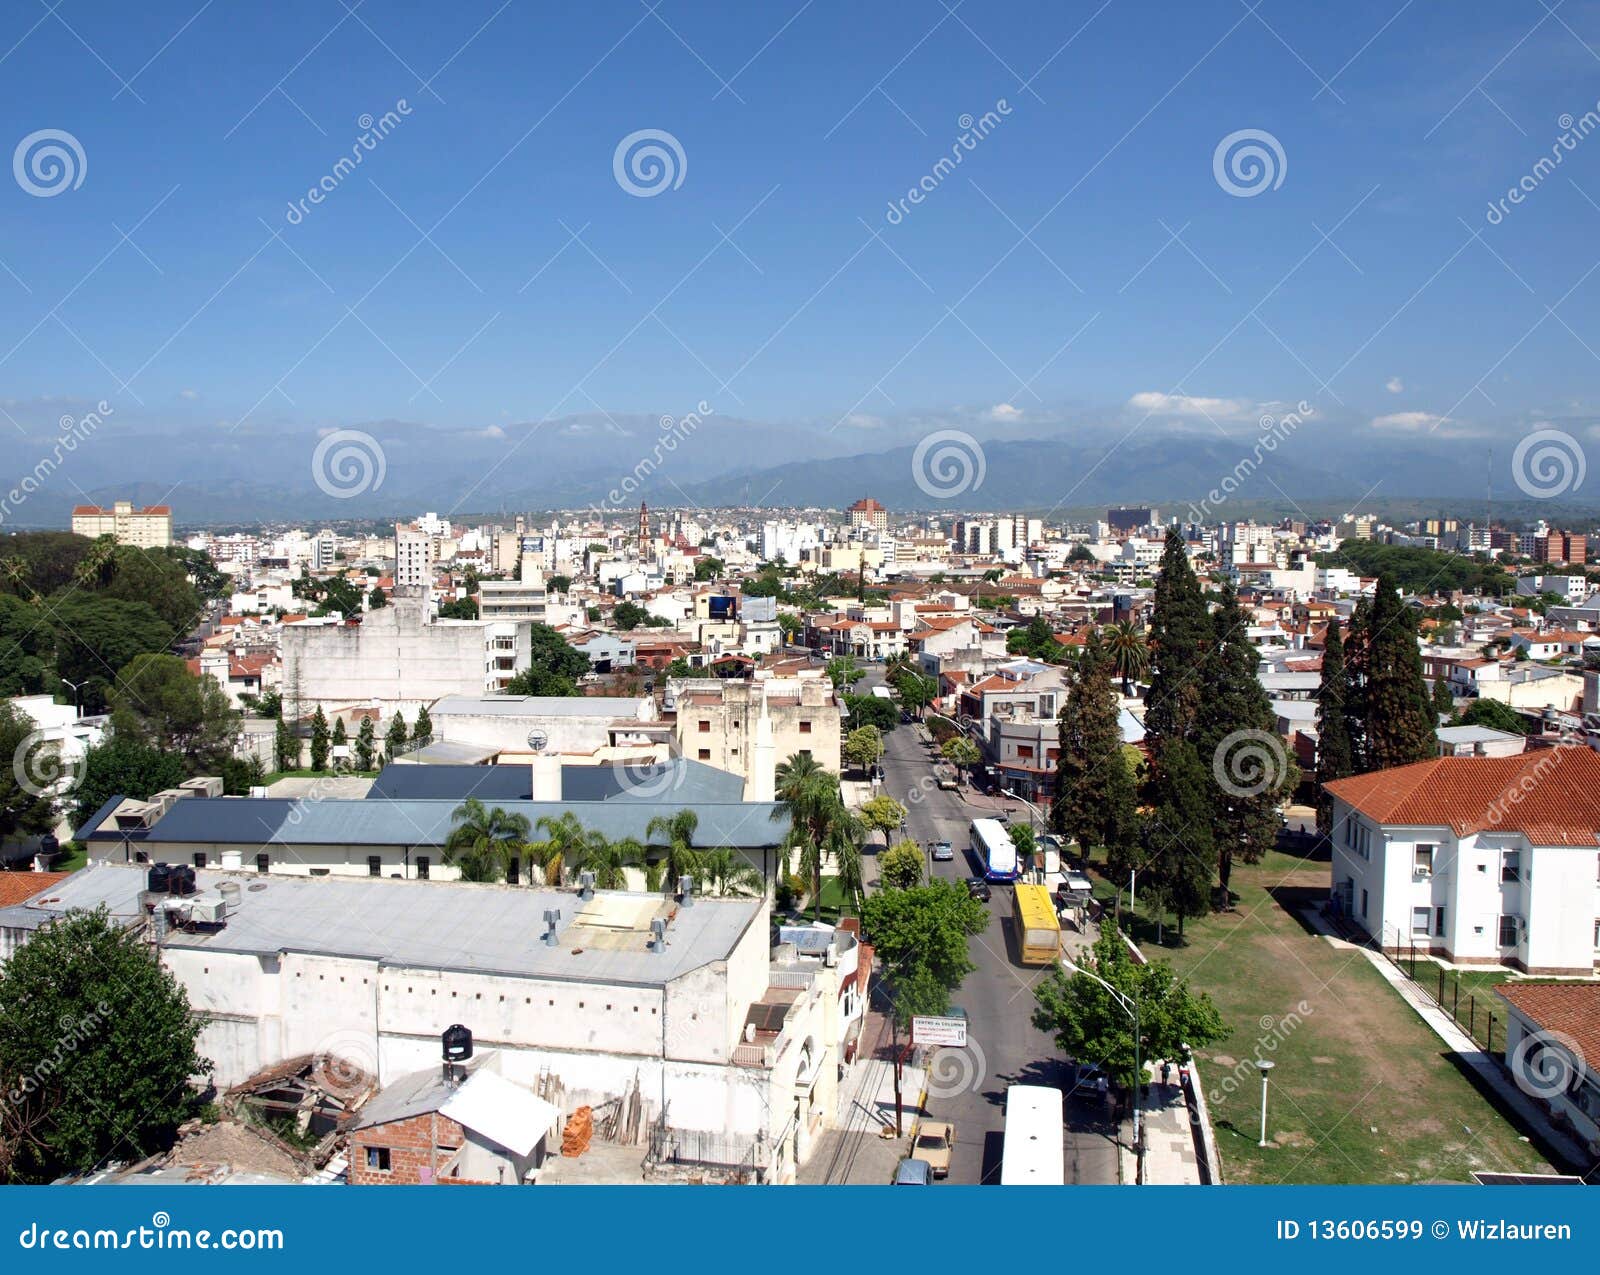 view over the city of salta